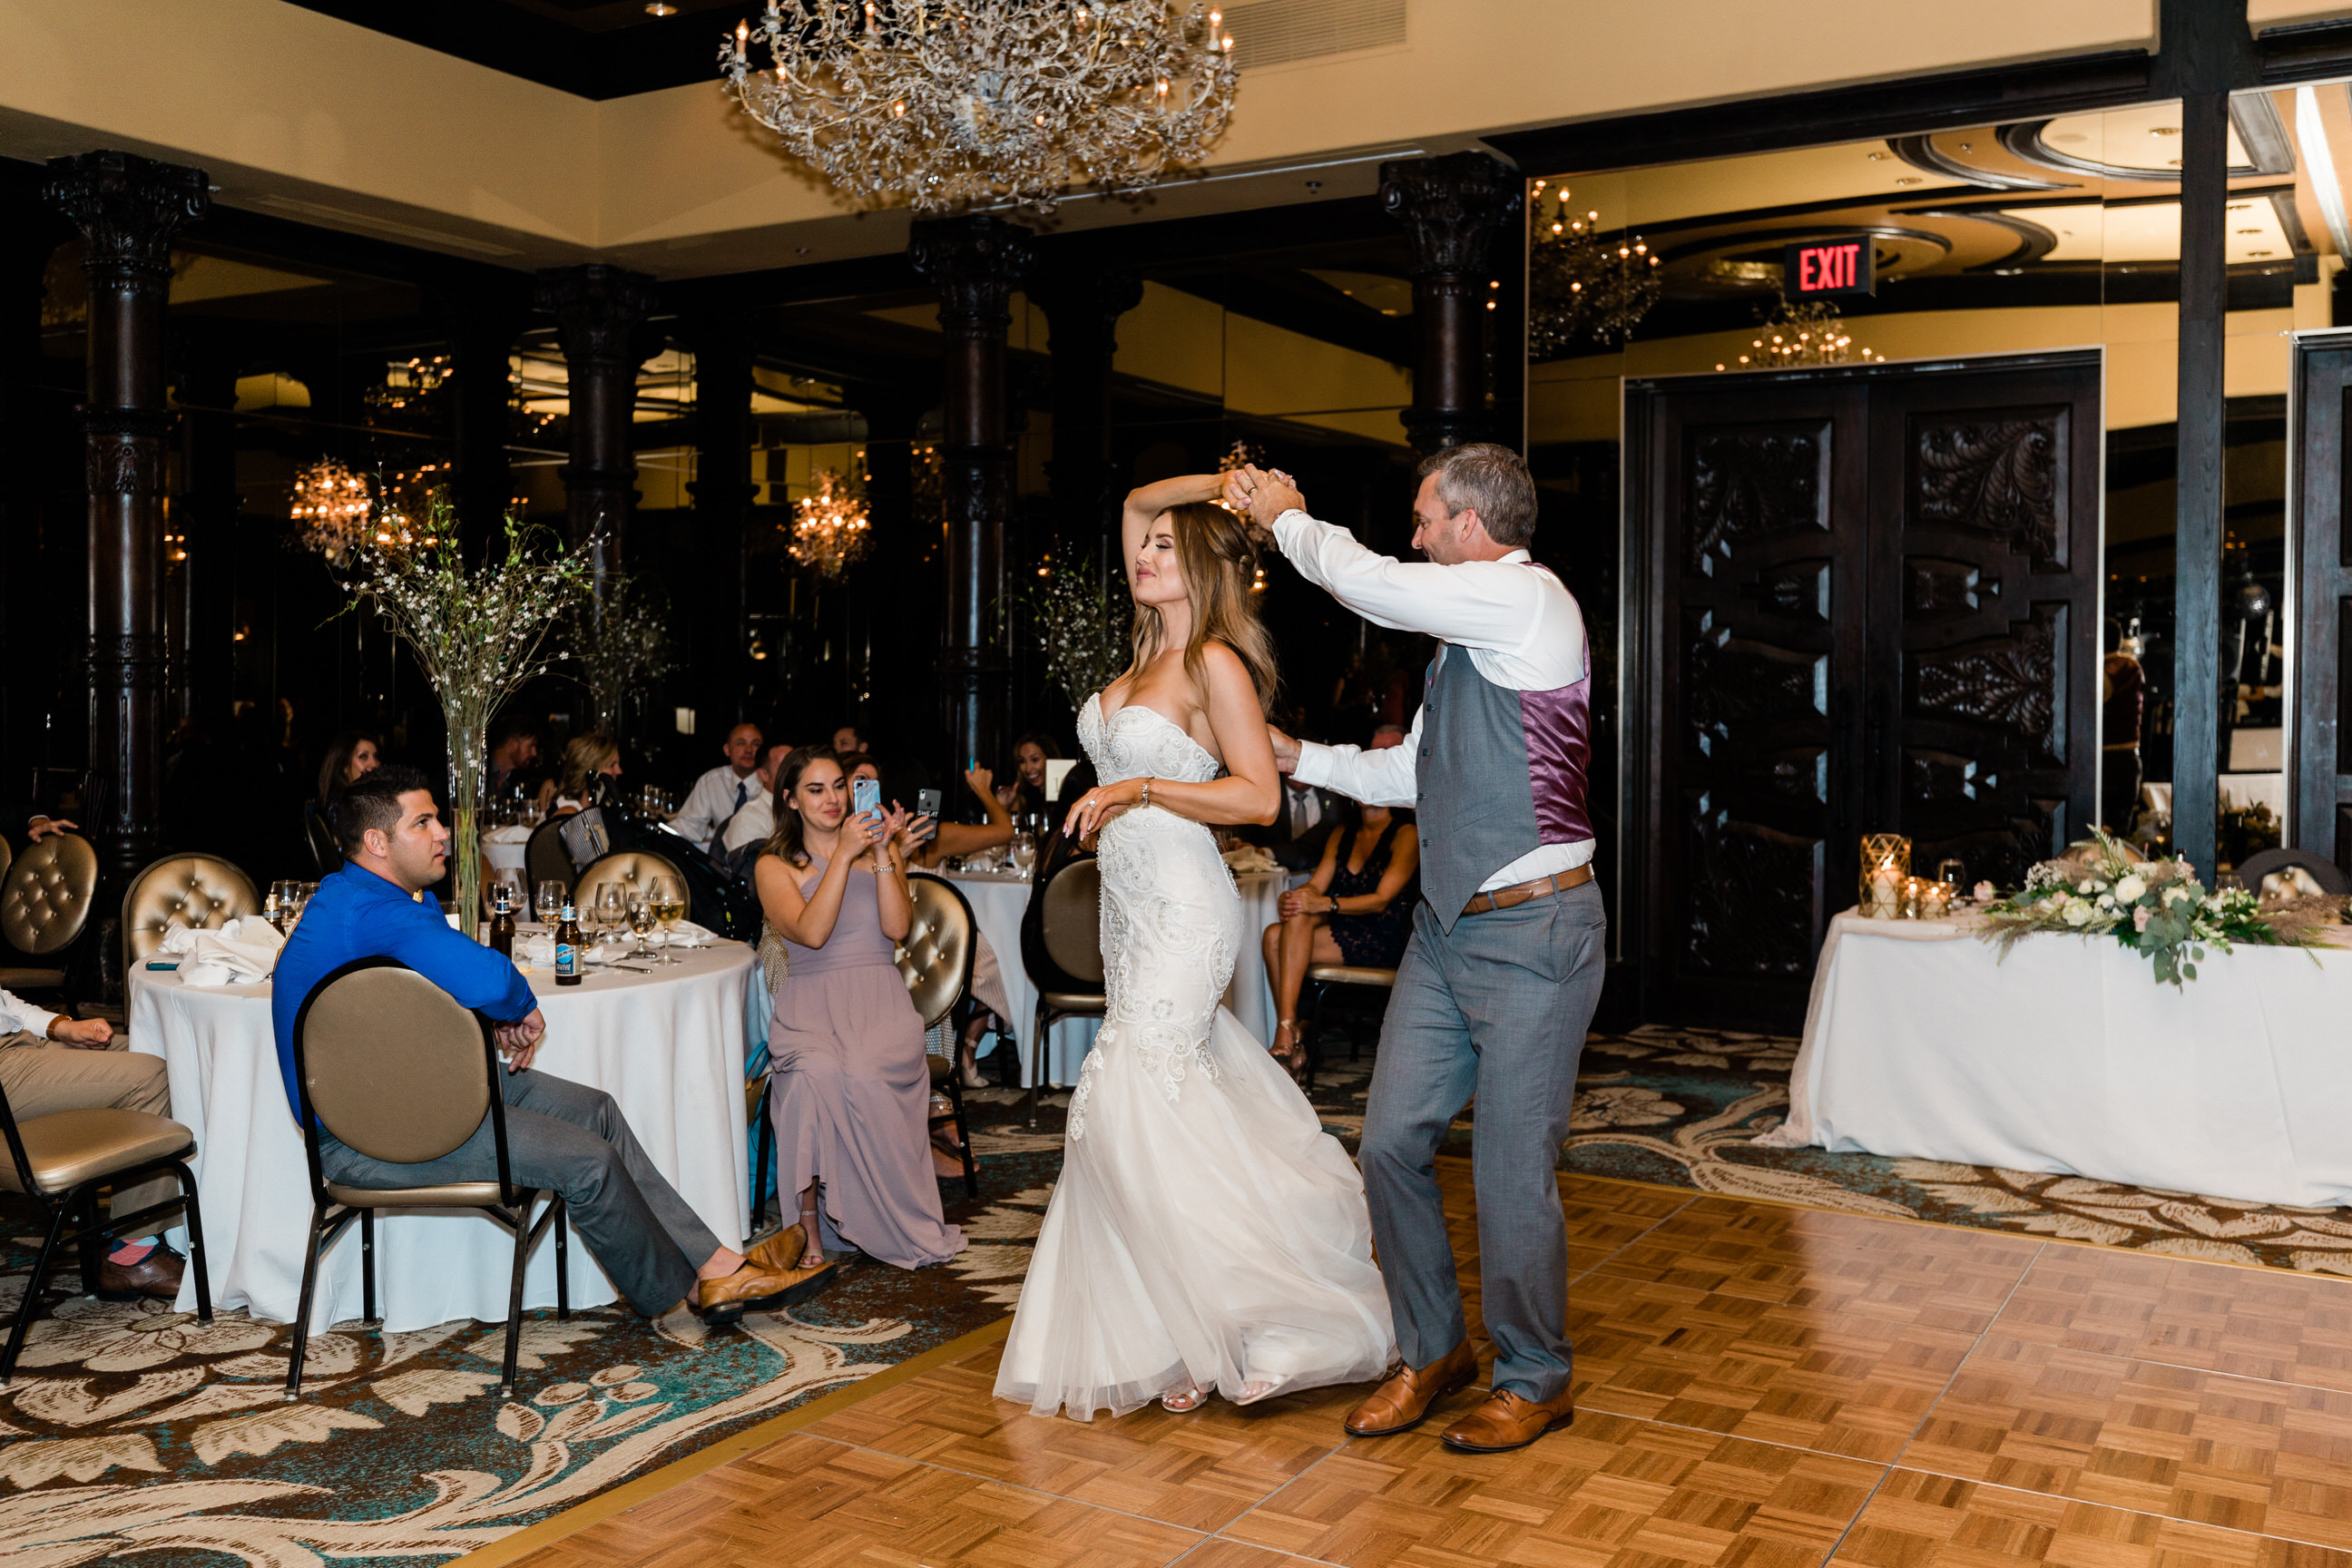 bride and groom first dance at wedding reception 